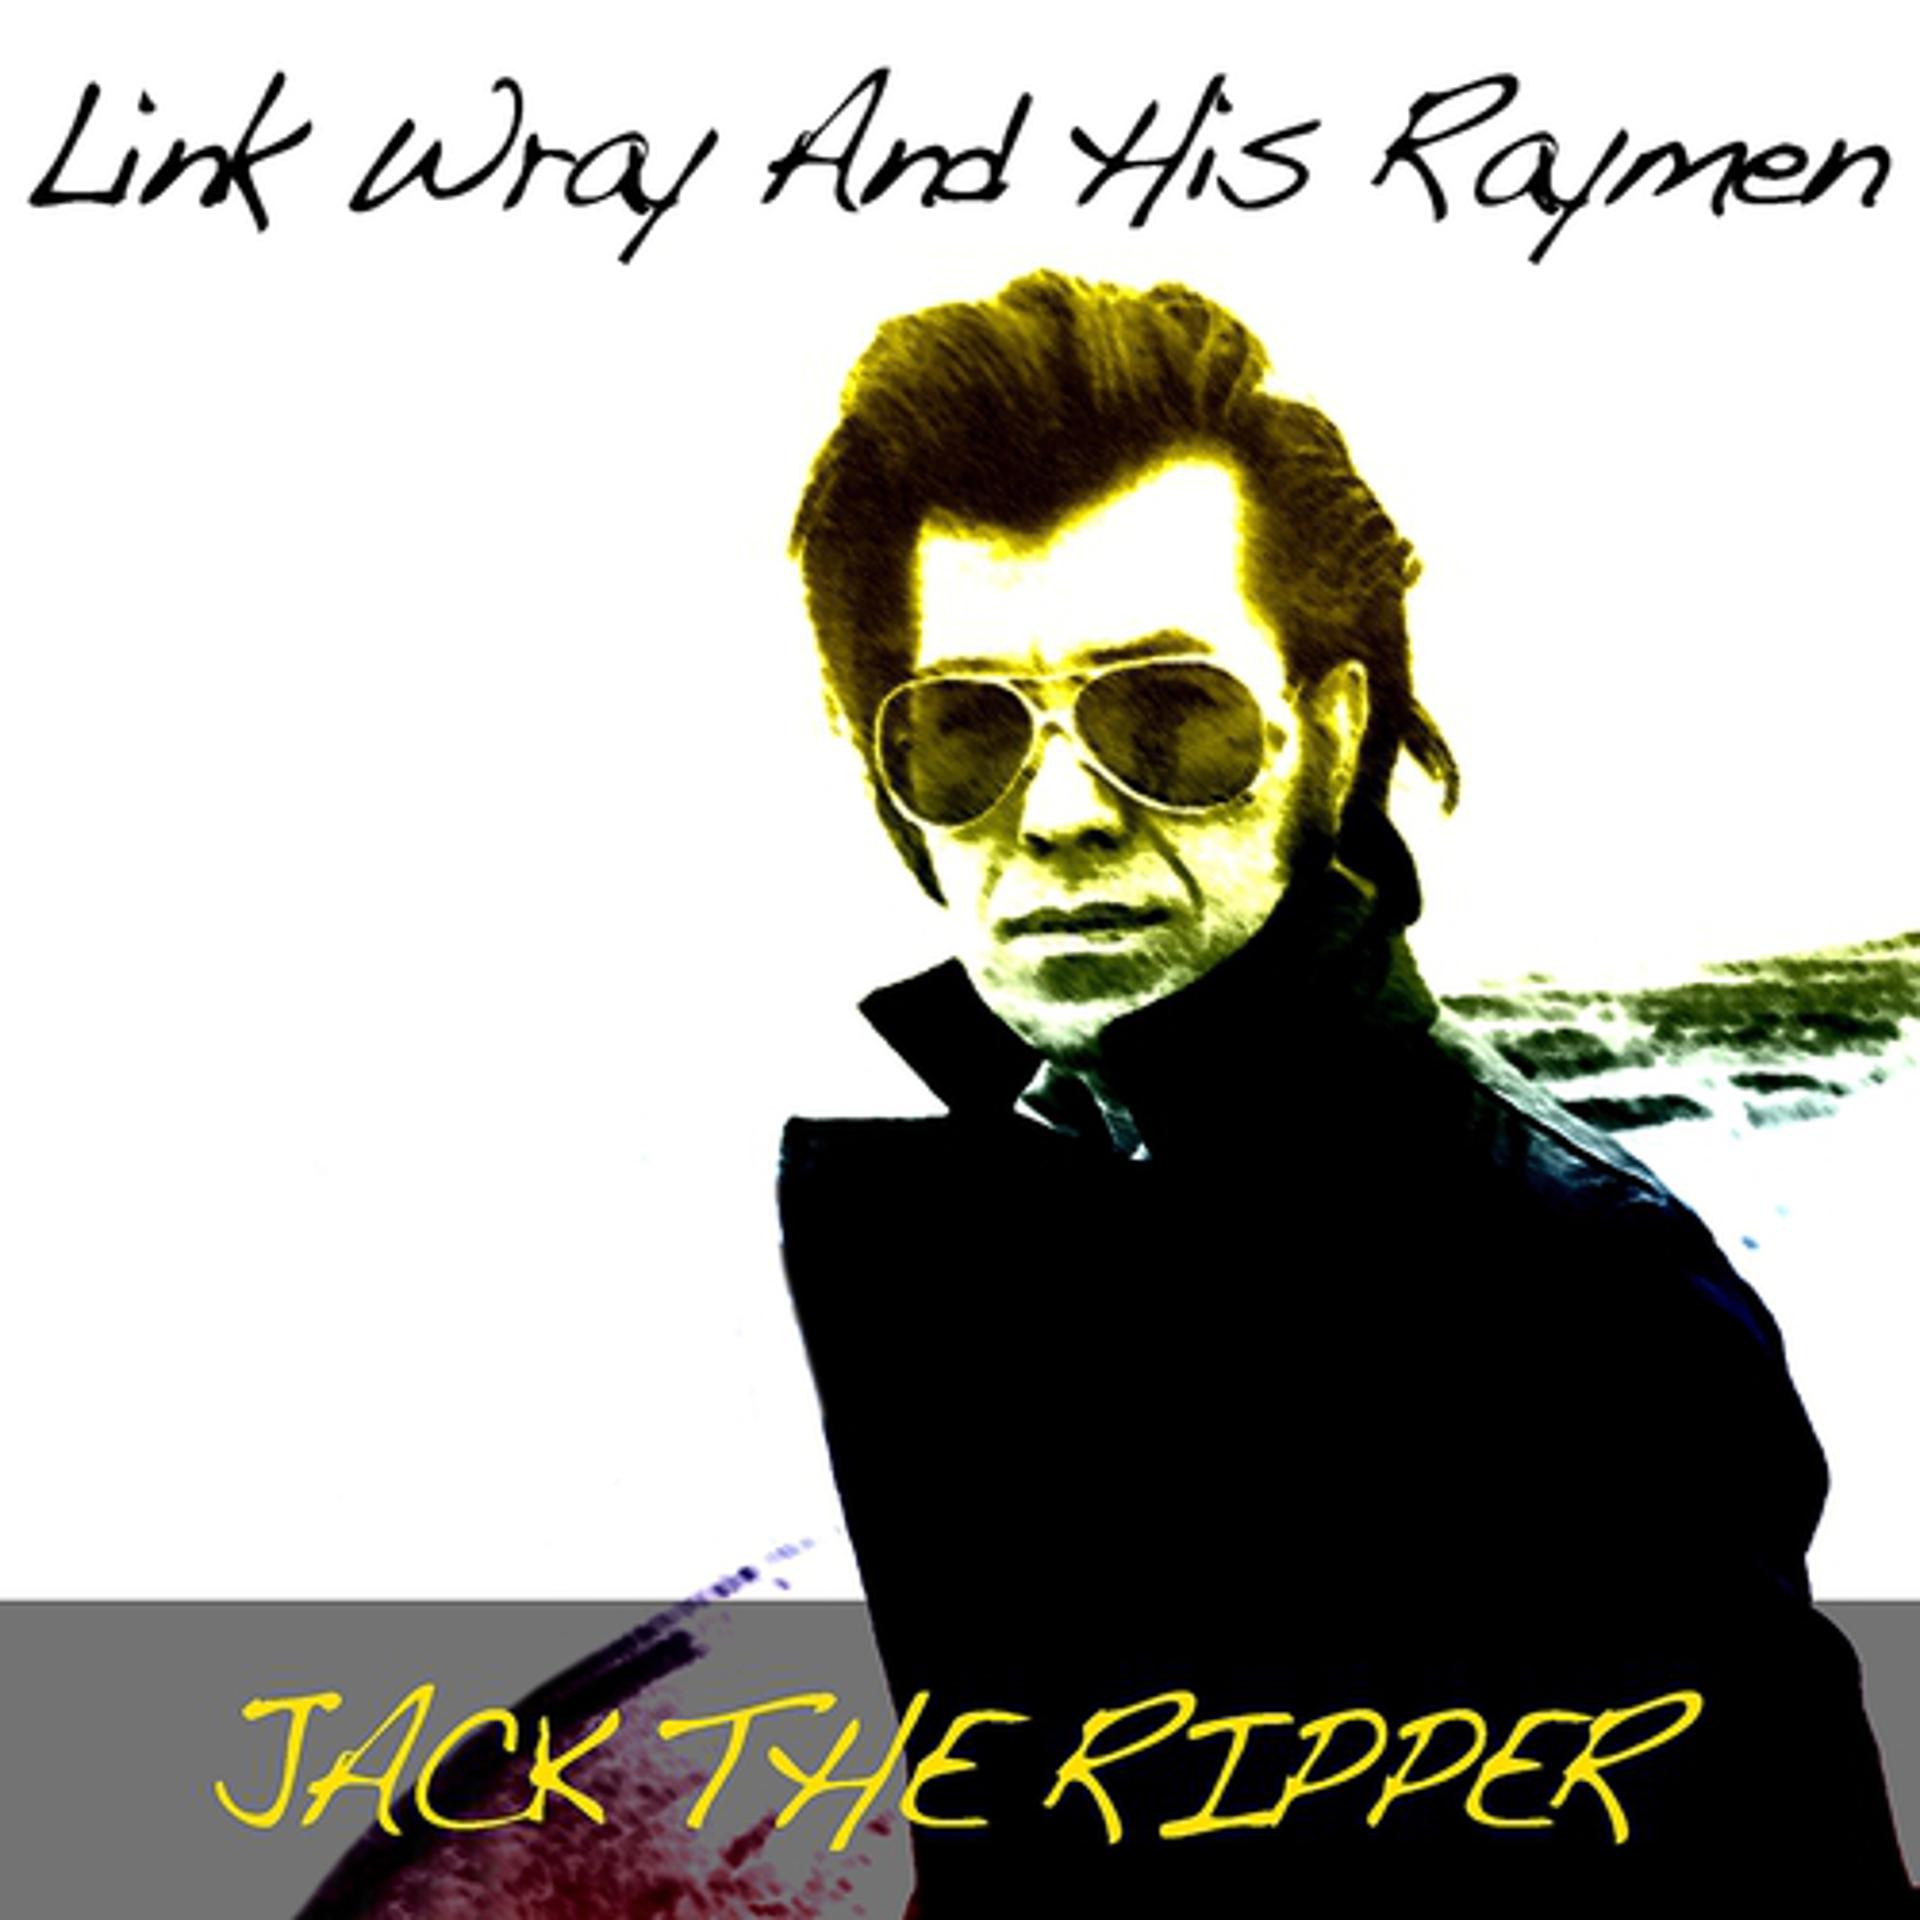 Постер альбома Link Wray and His Raymen: Jack the Ripper